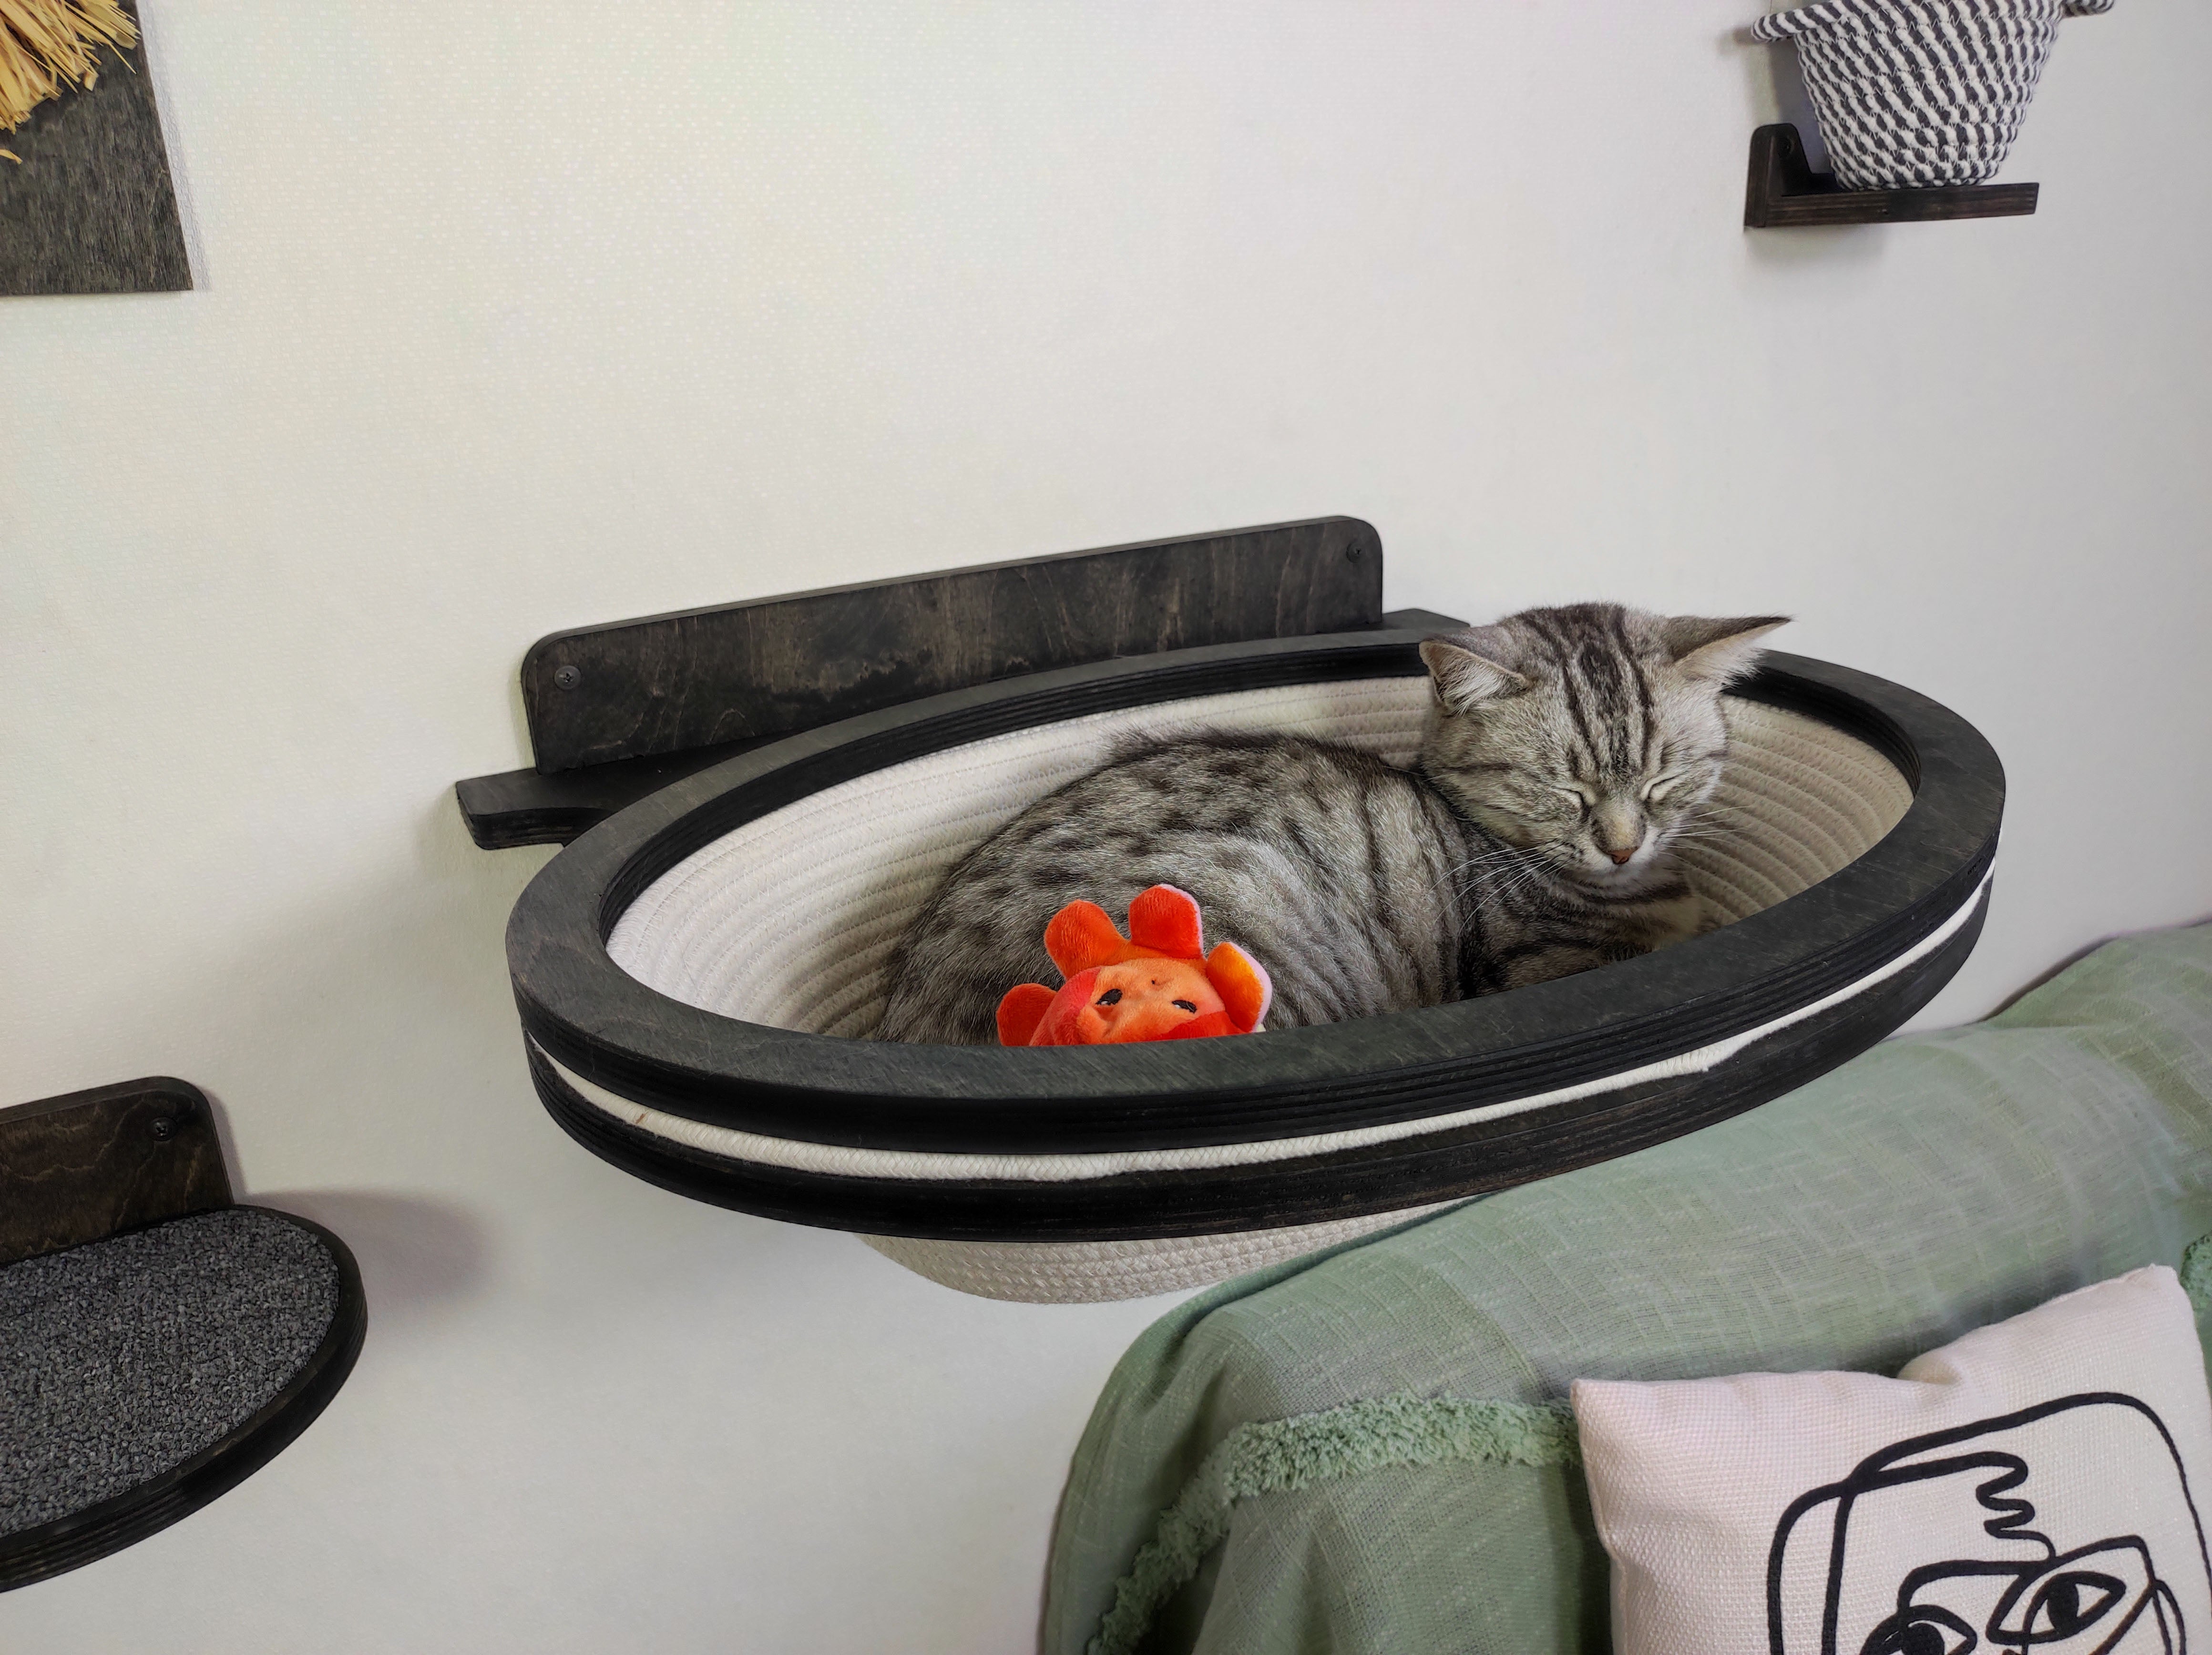 The cat sleeps in a wall-mounted oval cotton basket